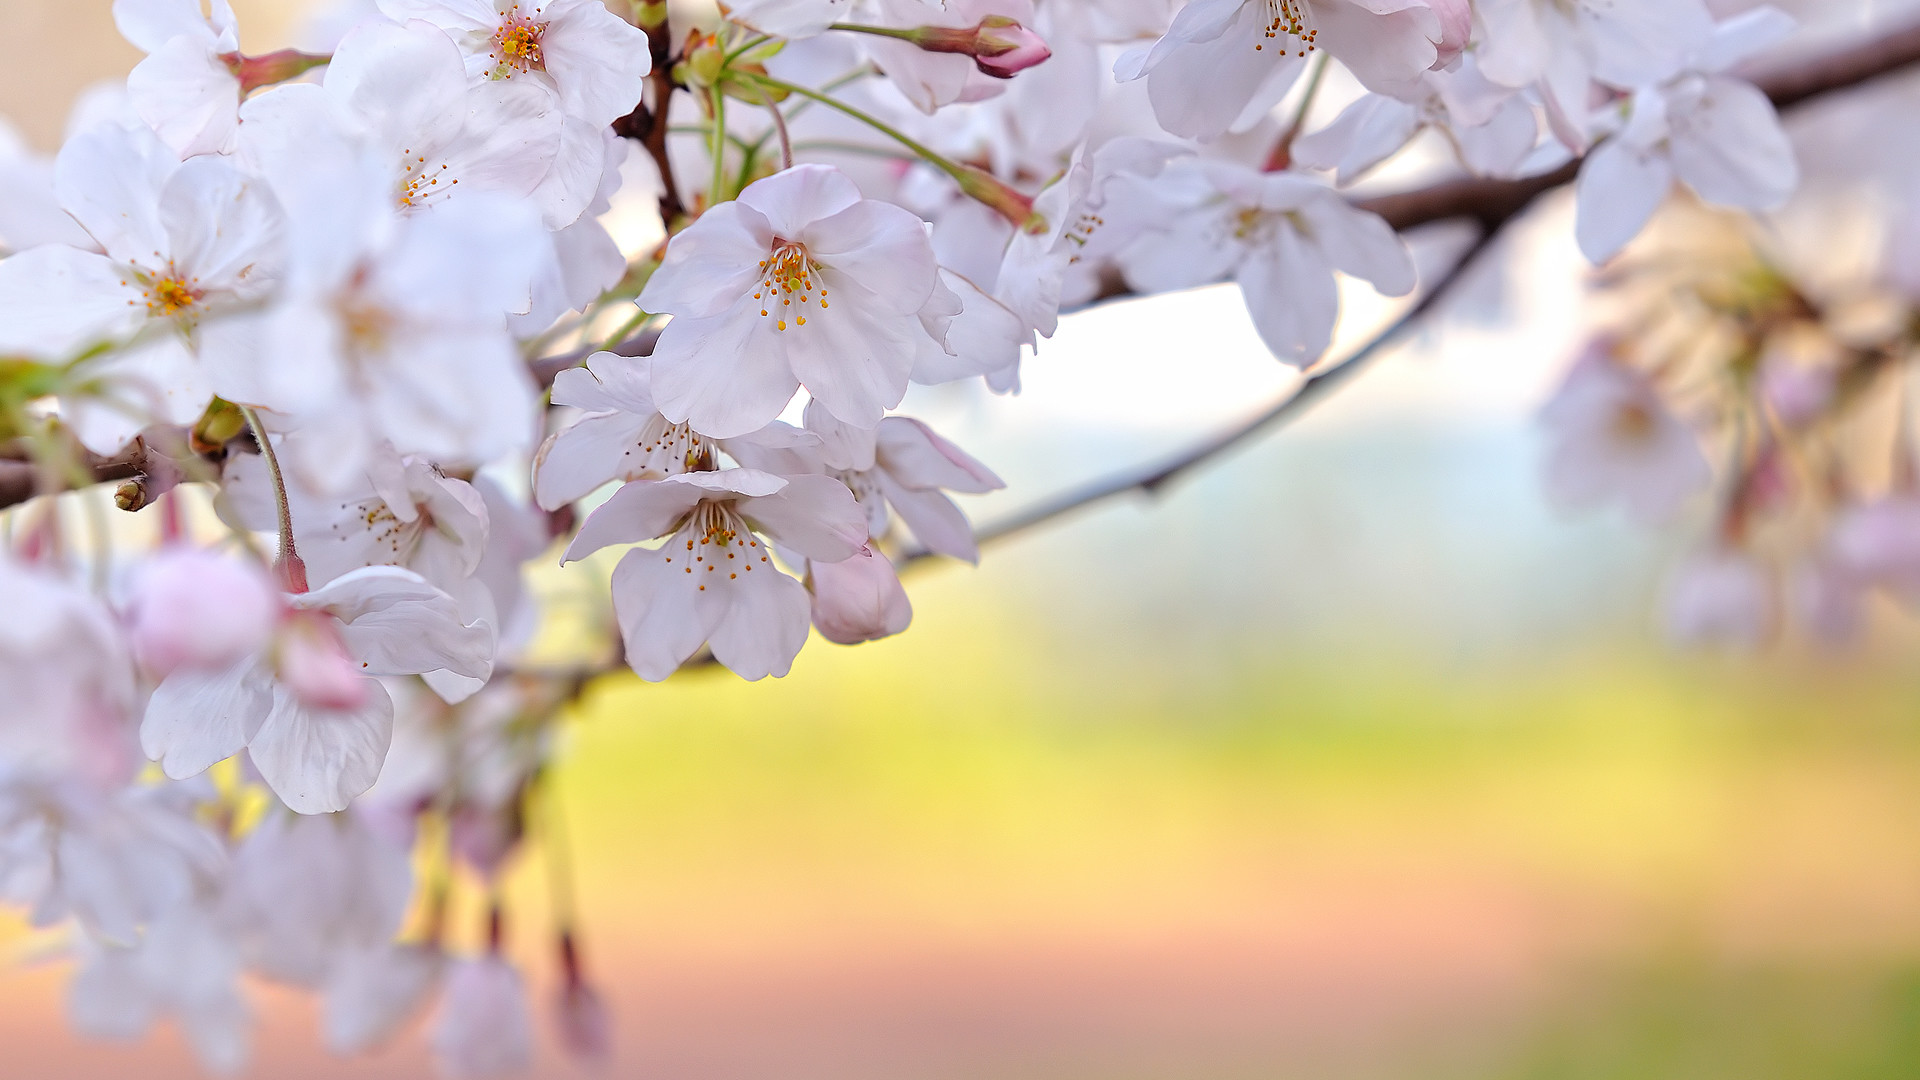 1920x1080 50 Lovely Cherry Blossom Wallpapers to brighten your Desktop